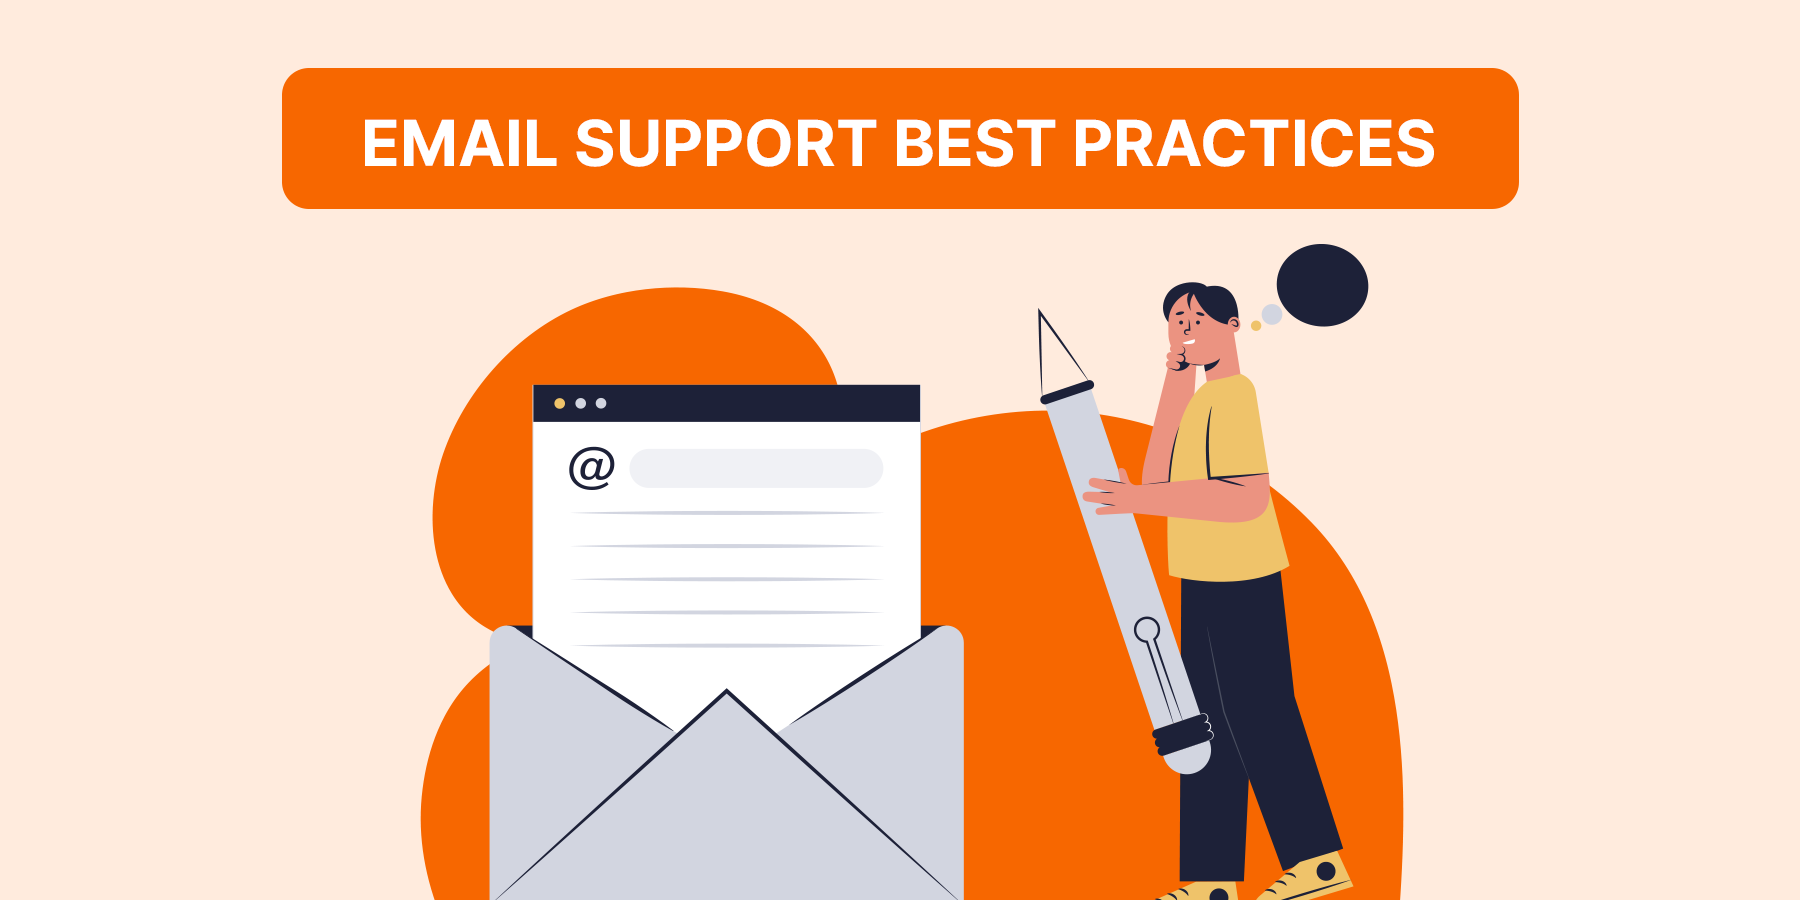 Email Support Best Practices